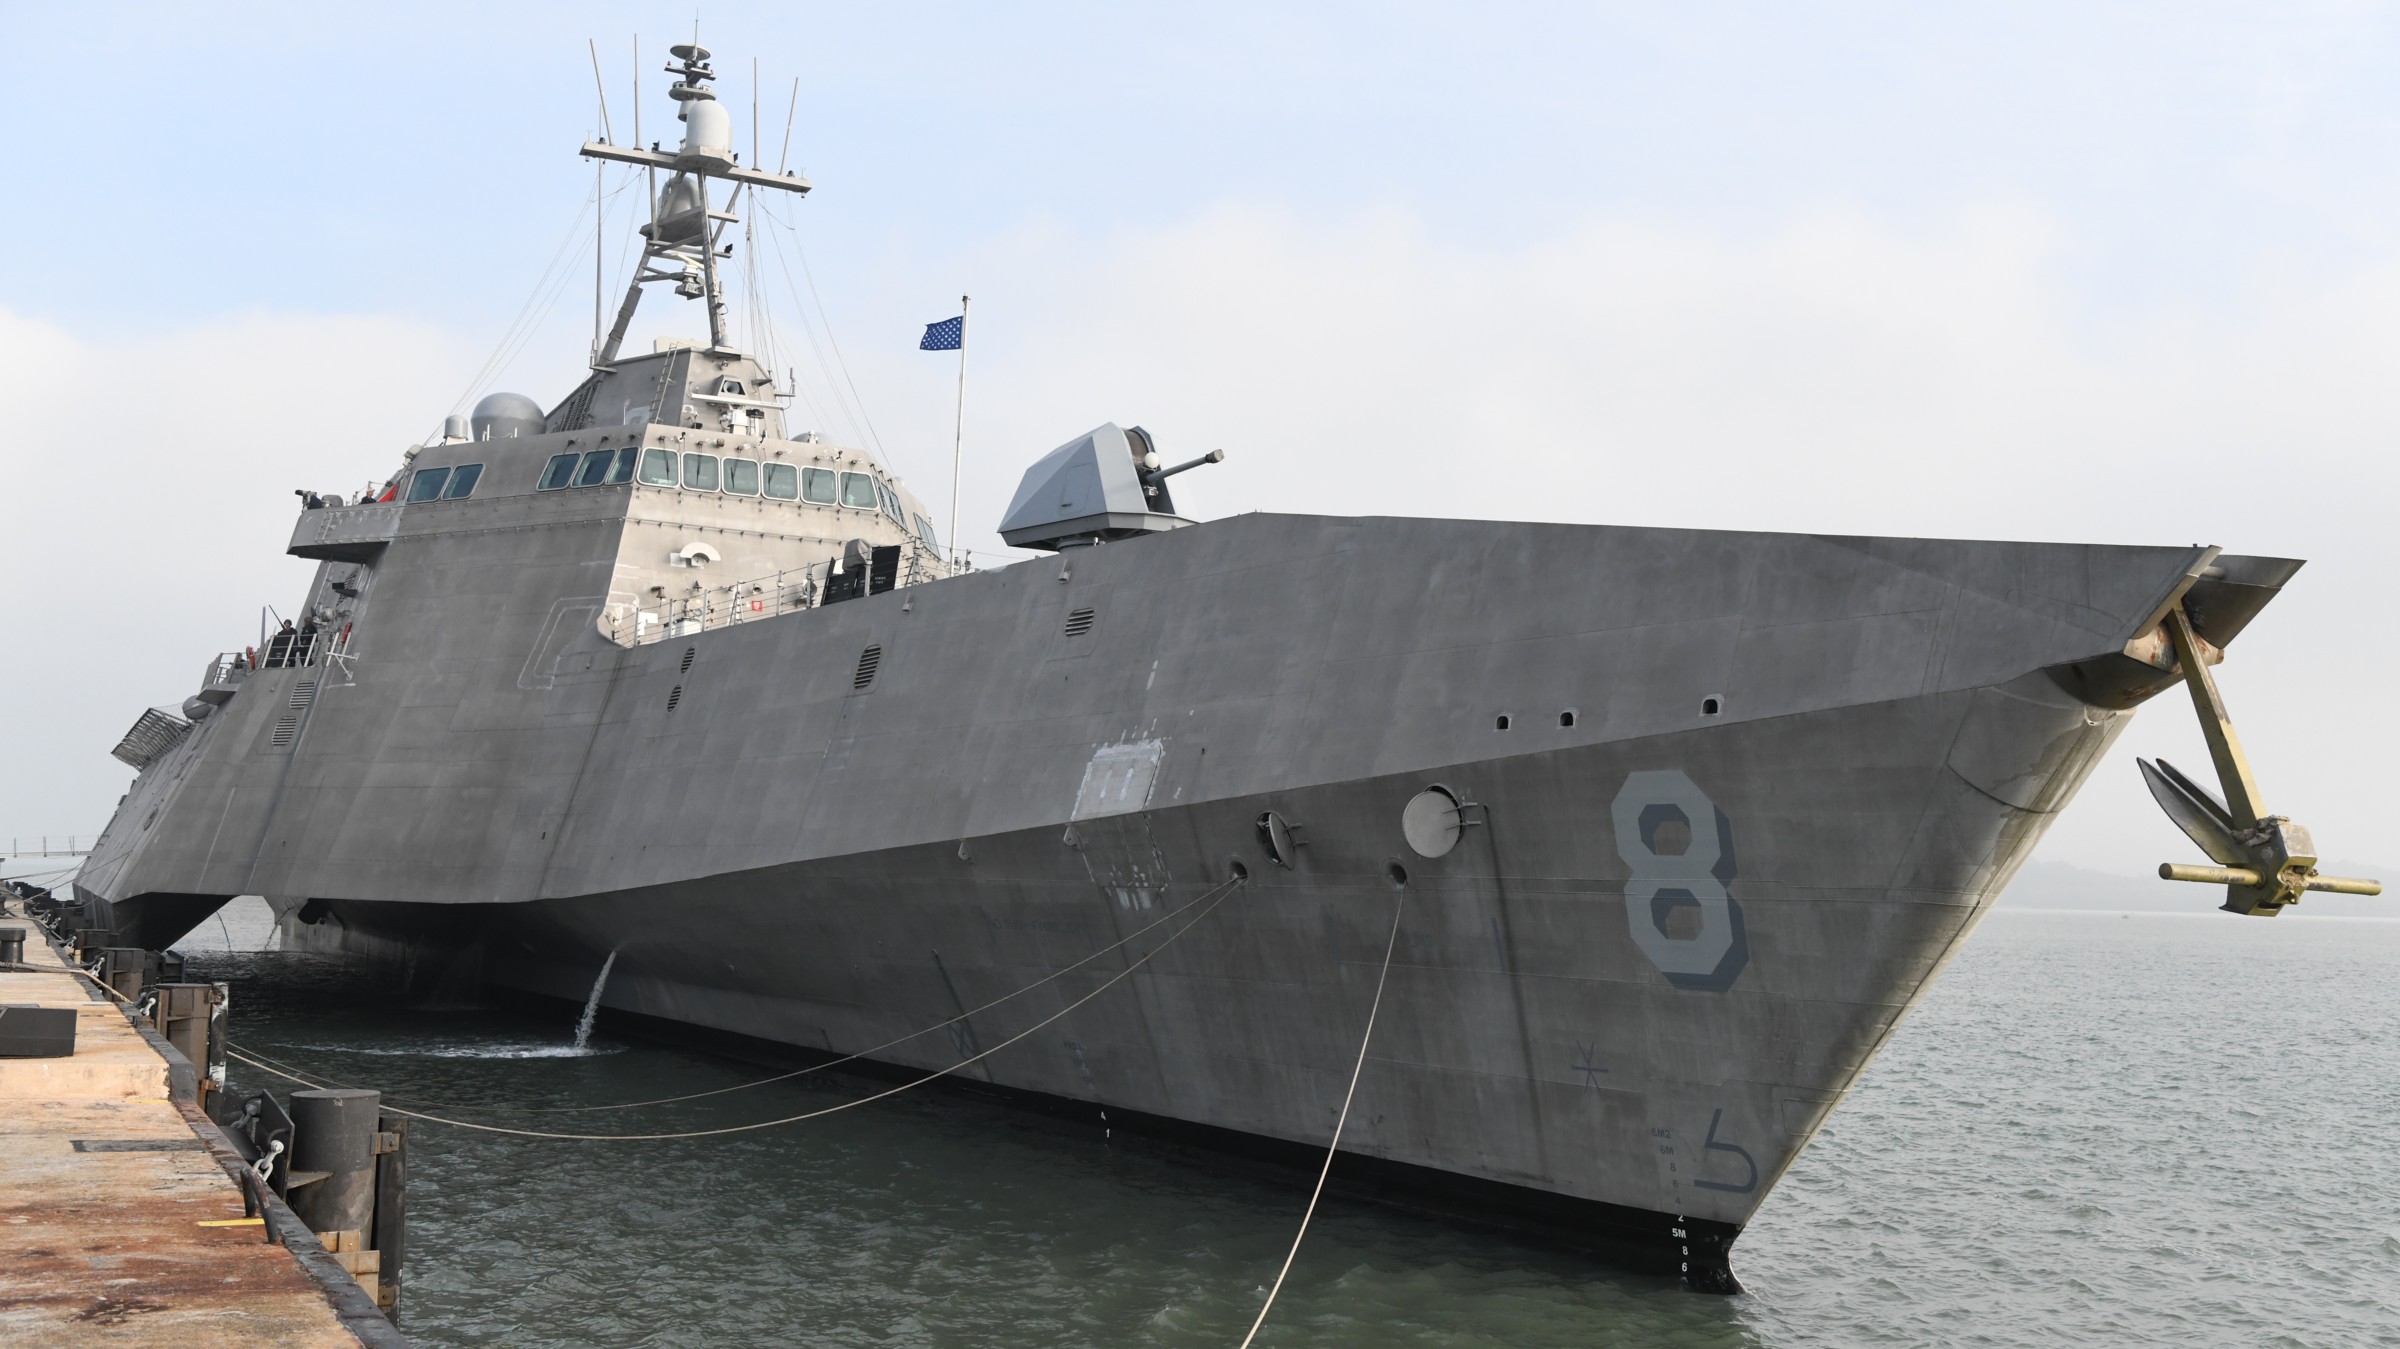 lcs-8 uss montgomery independence class littoral combat ship us navy 34 lumut naval base malaysia